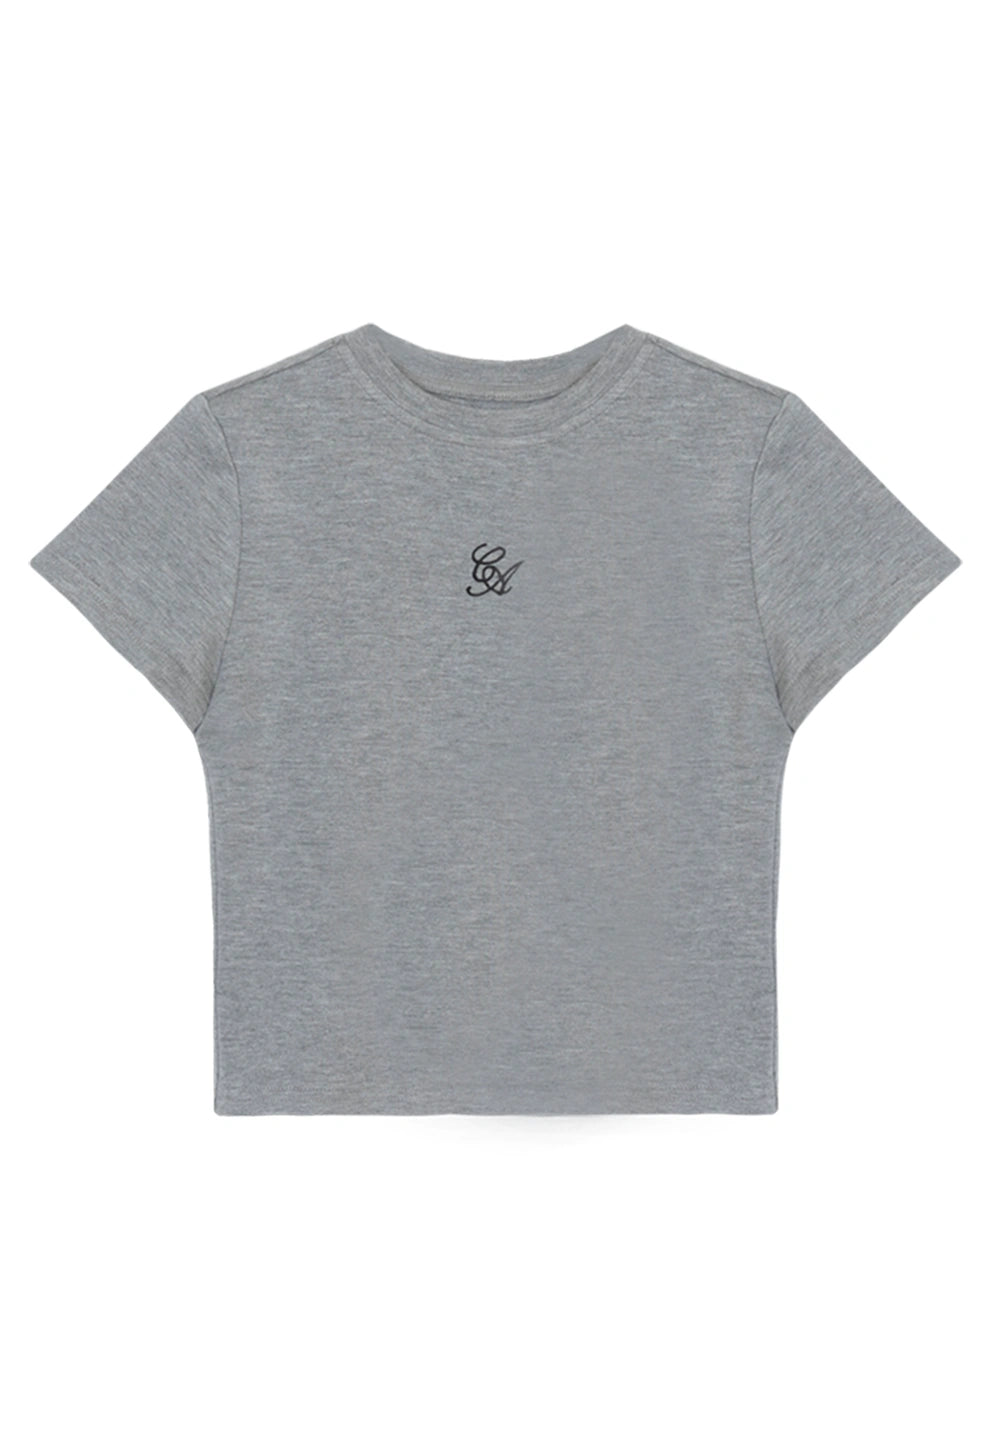 Women's Cropped Grey T-Shirt with Elegant Embroidered Logo - Soft Cotton Blend, Comfort Fit